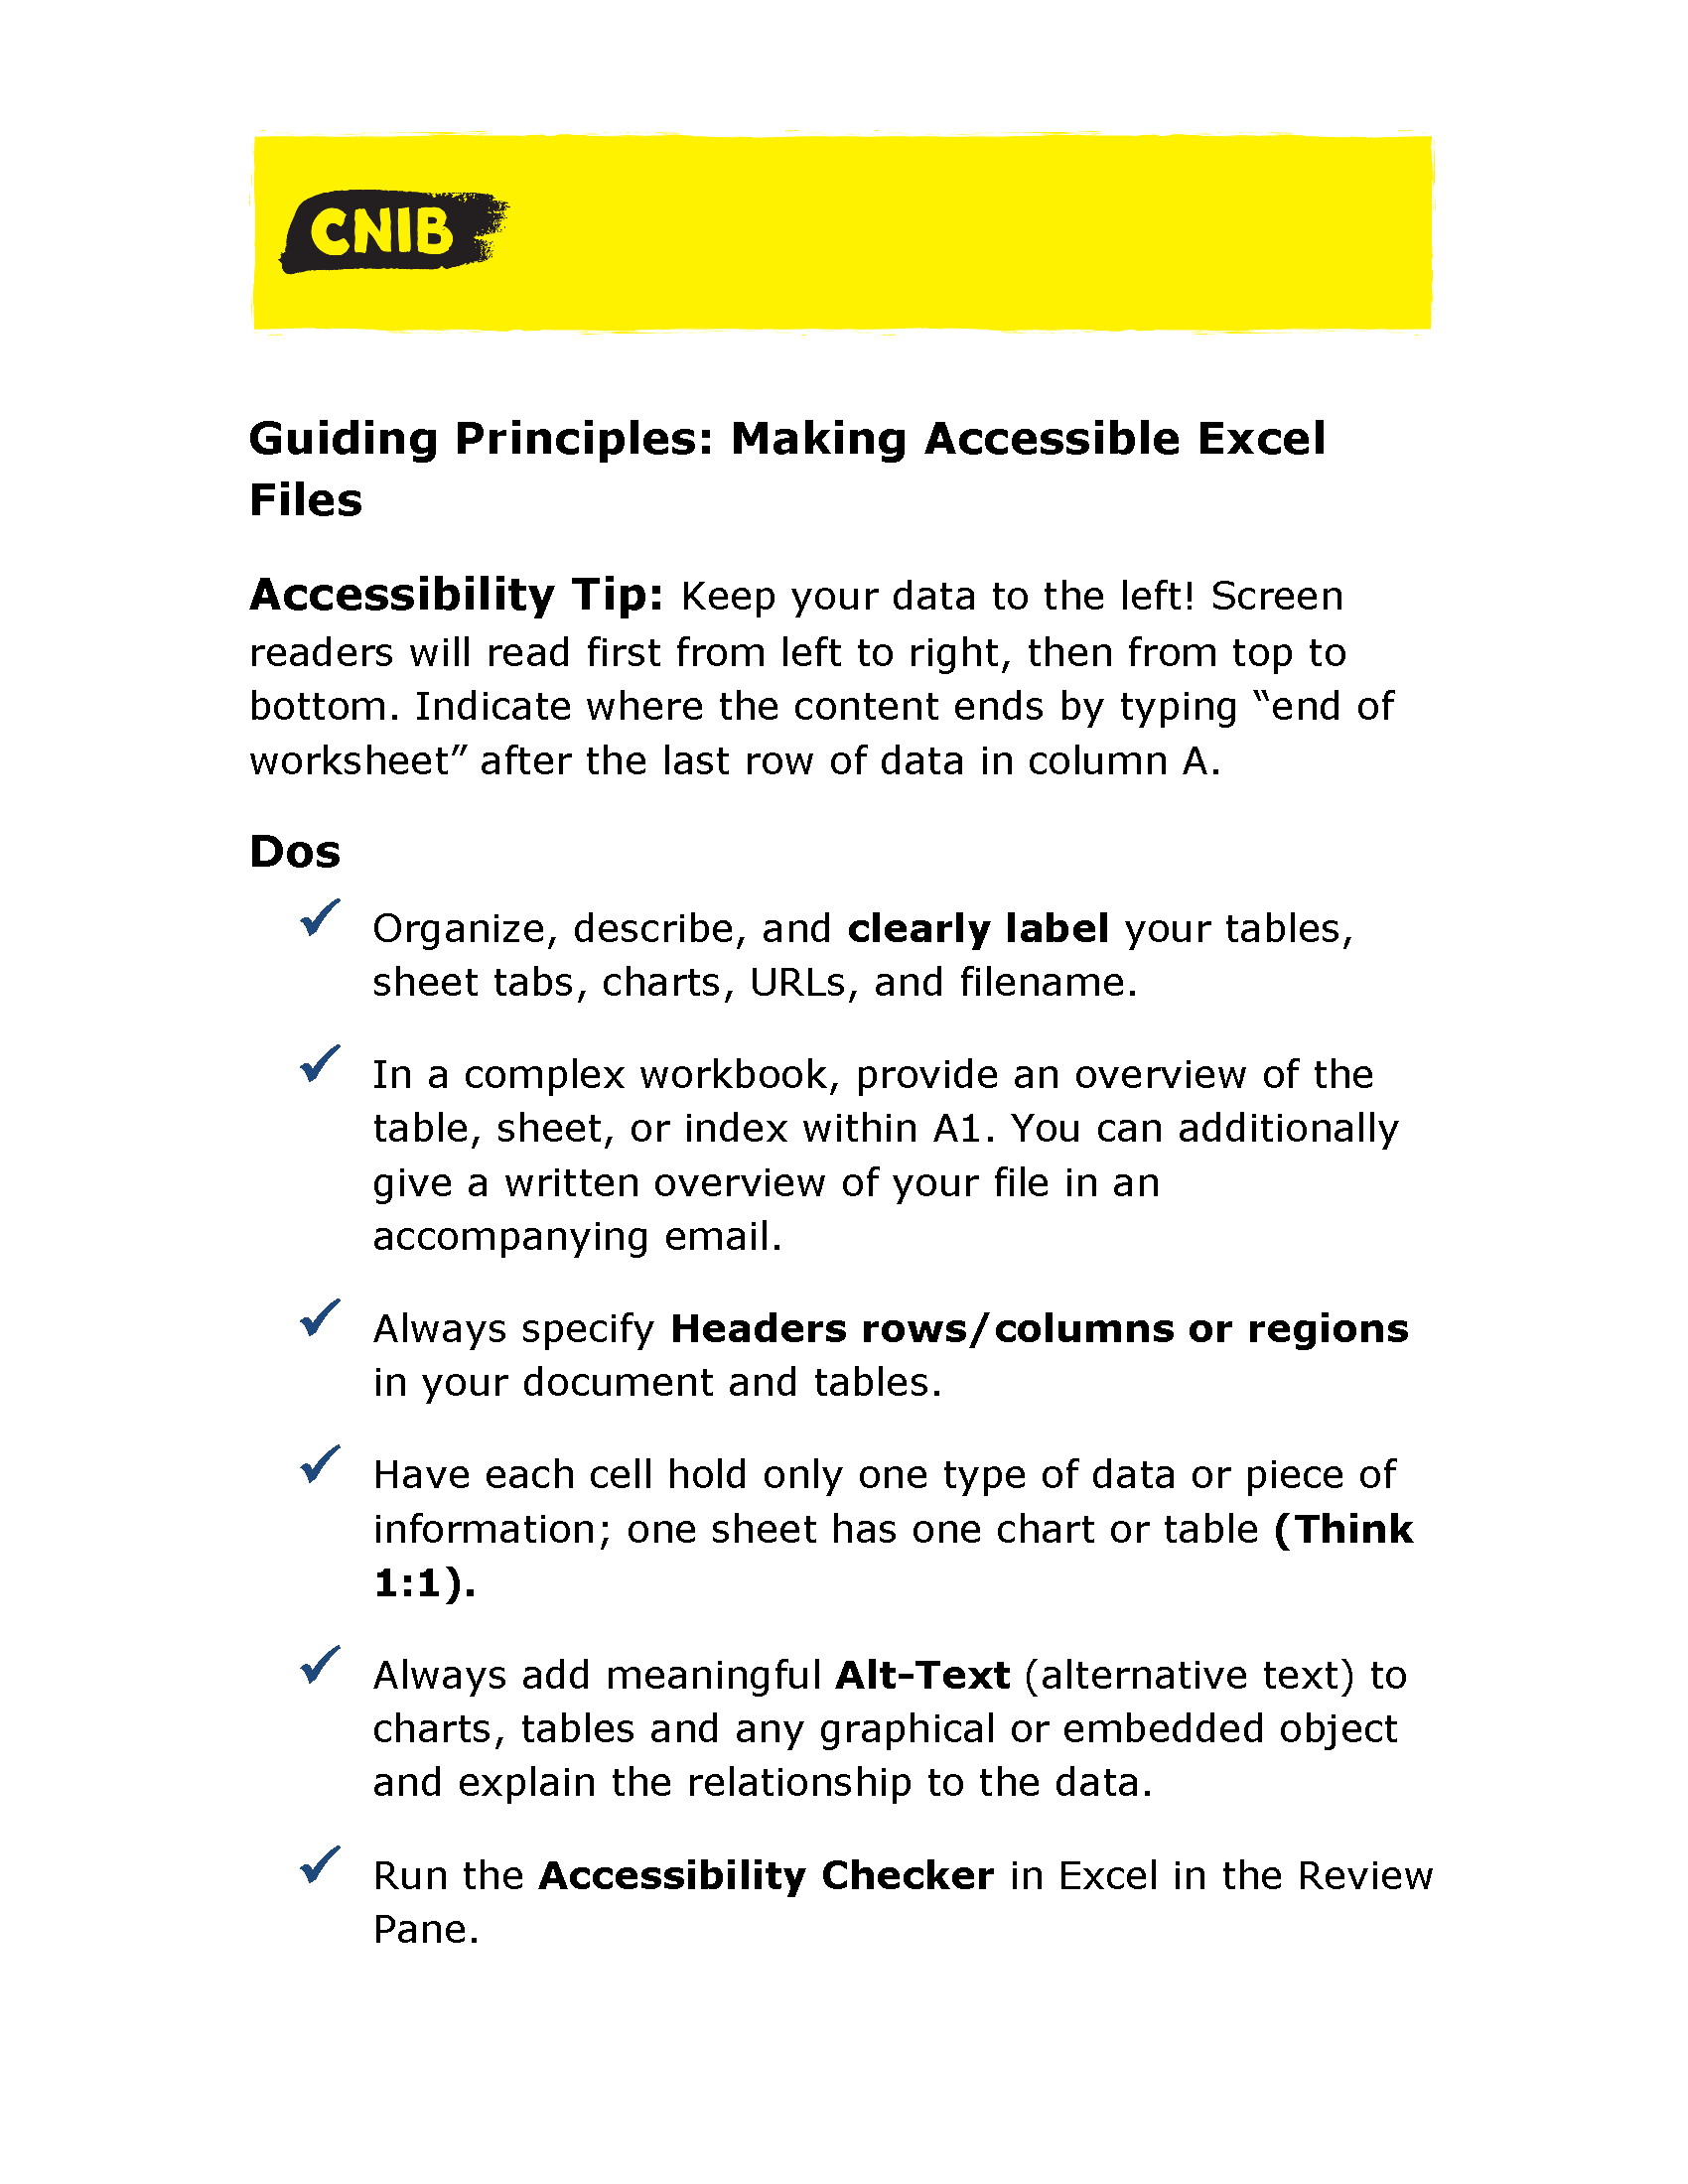 CNIB Guiding Principles:  Making Accessible Excel Files